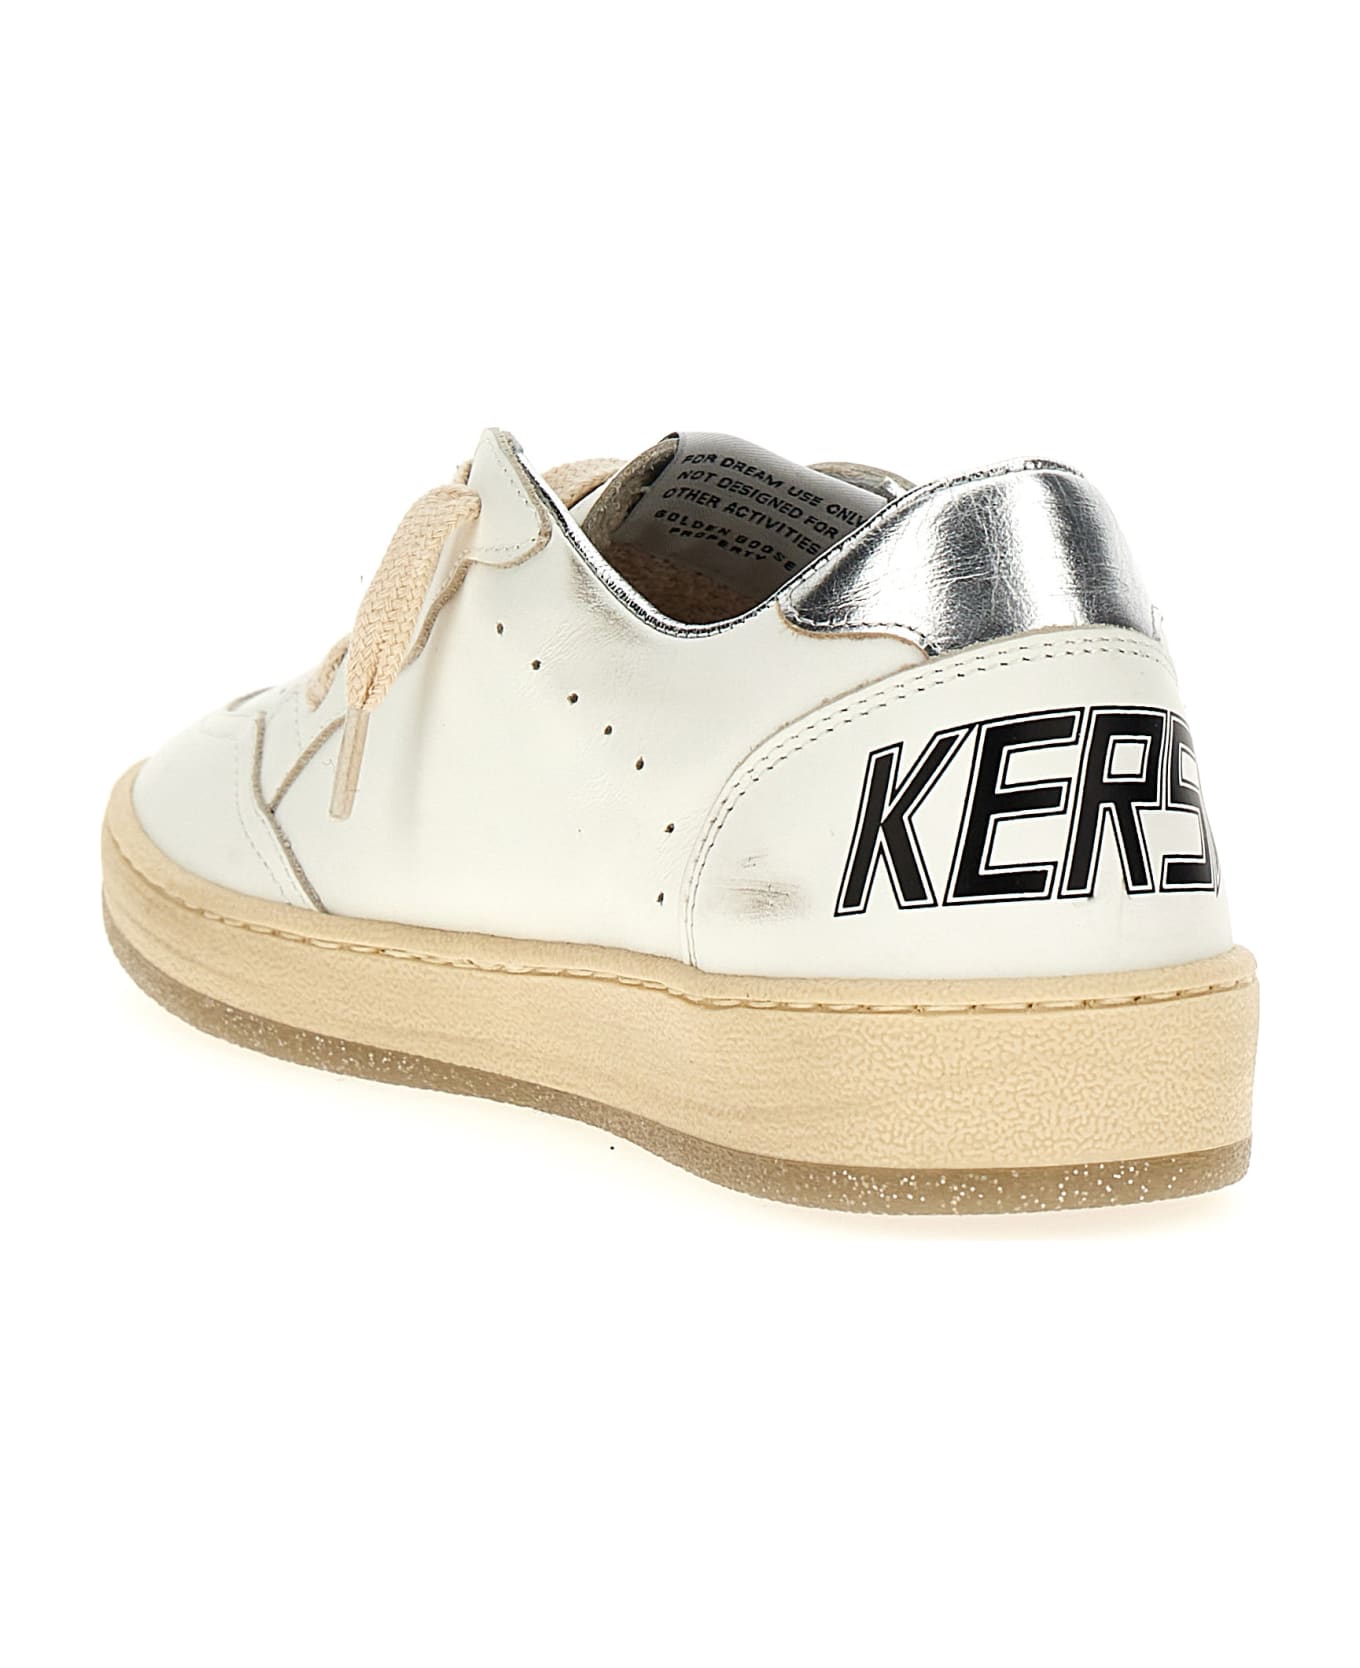 Golden Goose 'ball Star New' Sneakers - Multicolor